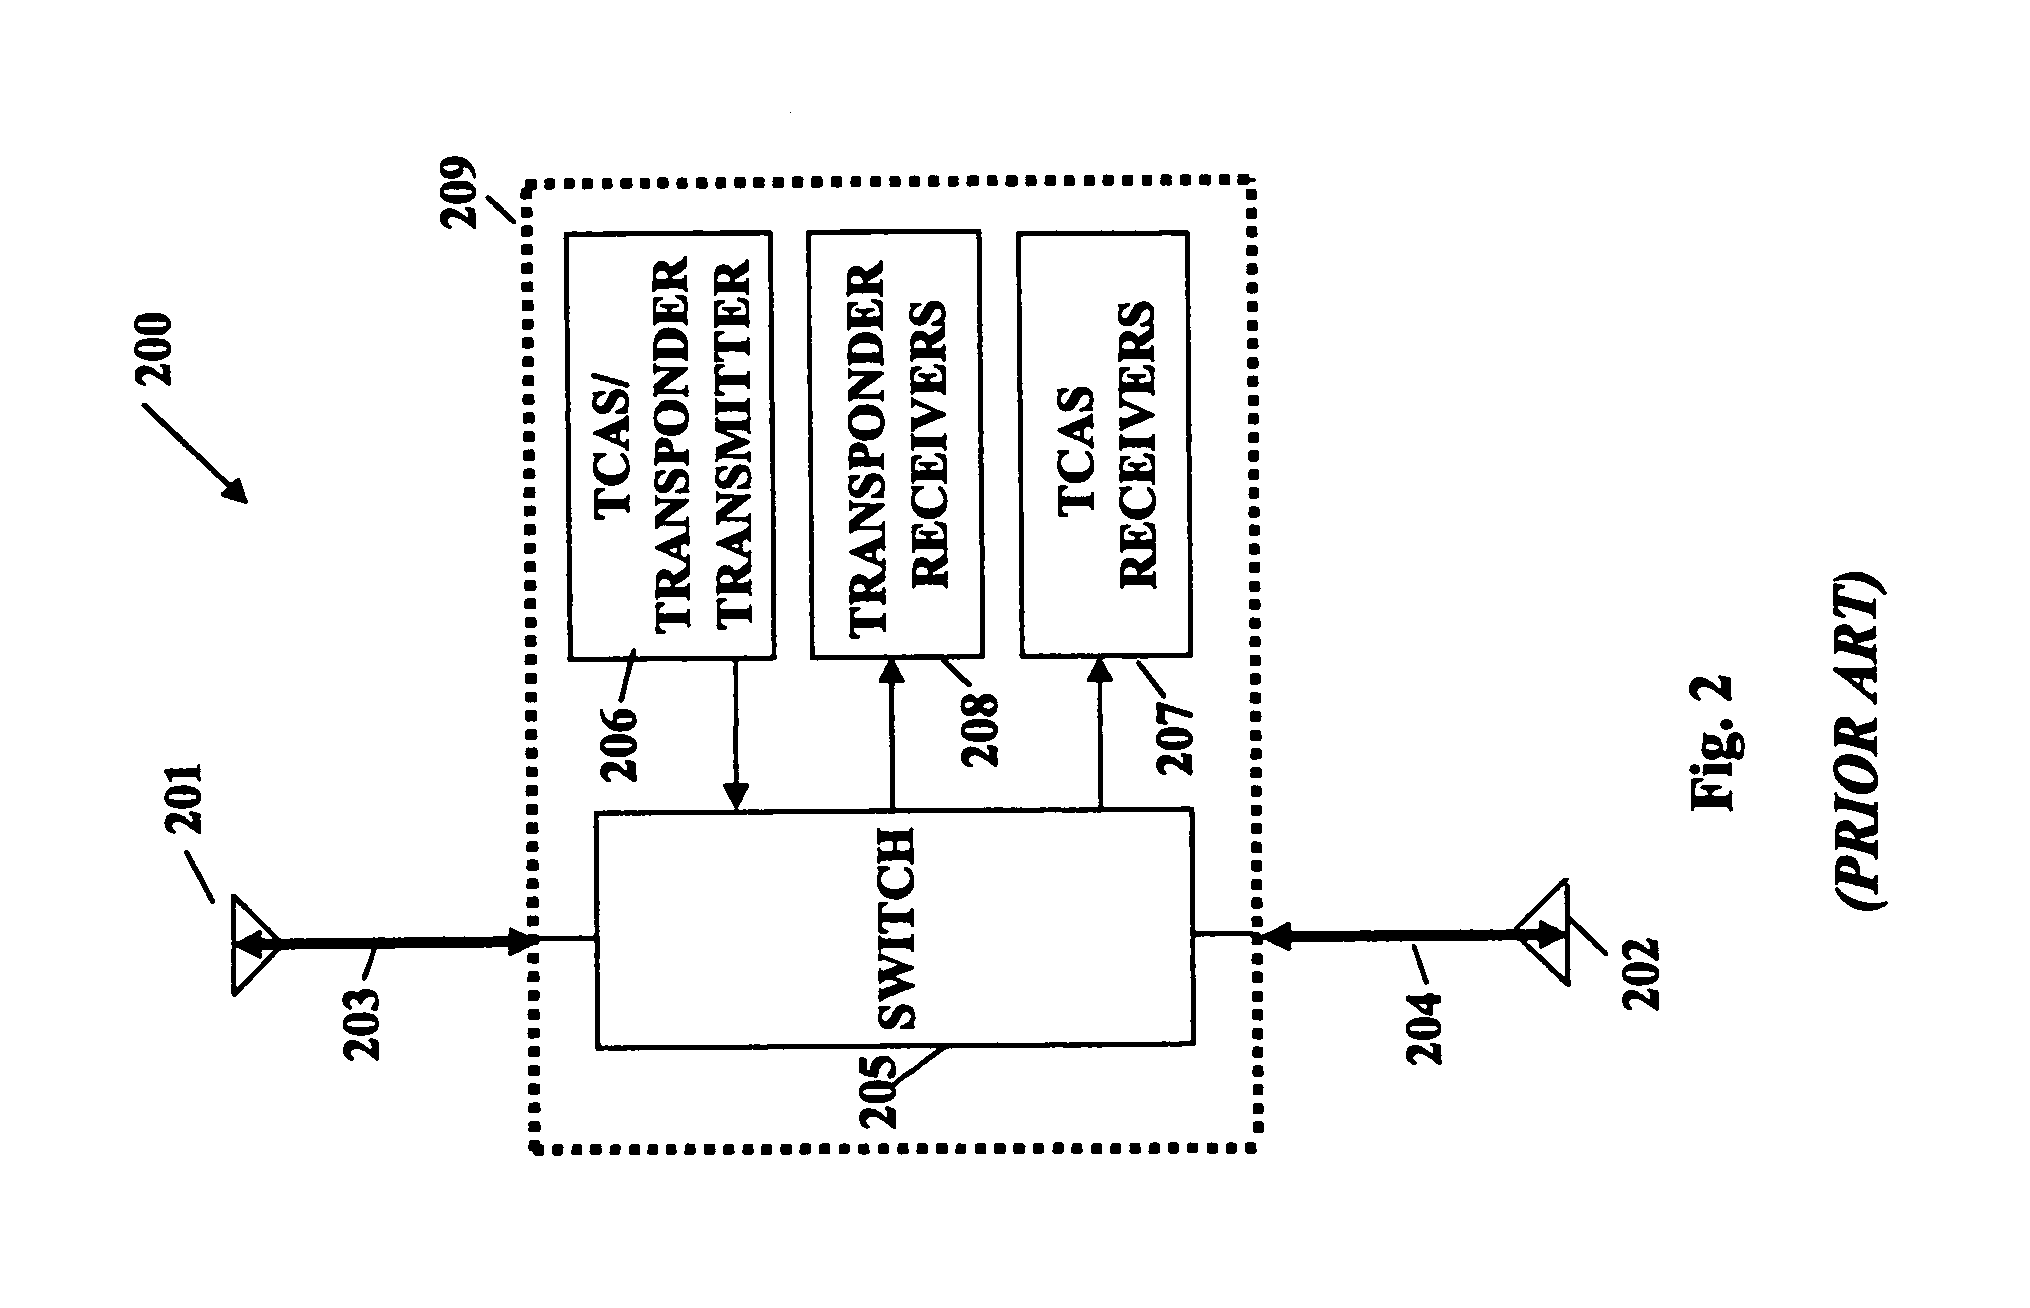 Combined aircraft TCAS/transponder with common antenna system